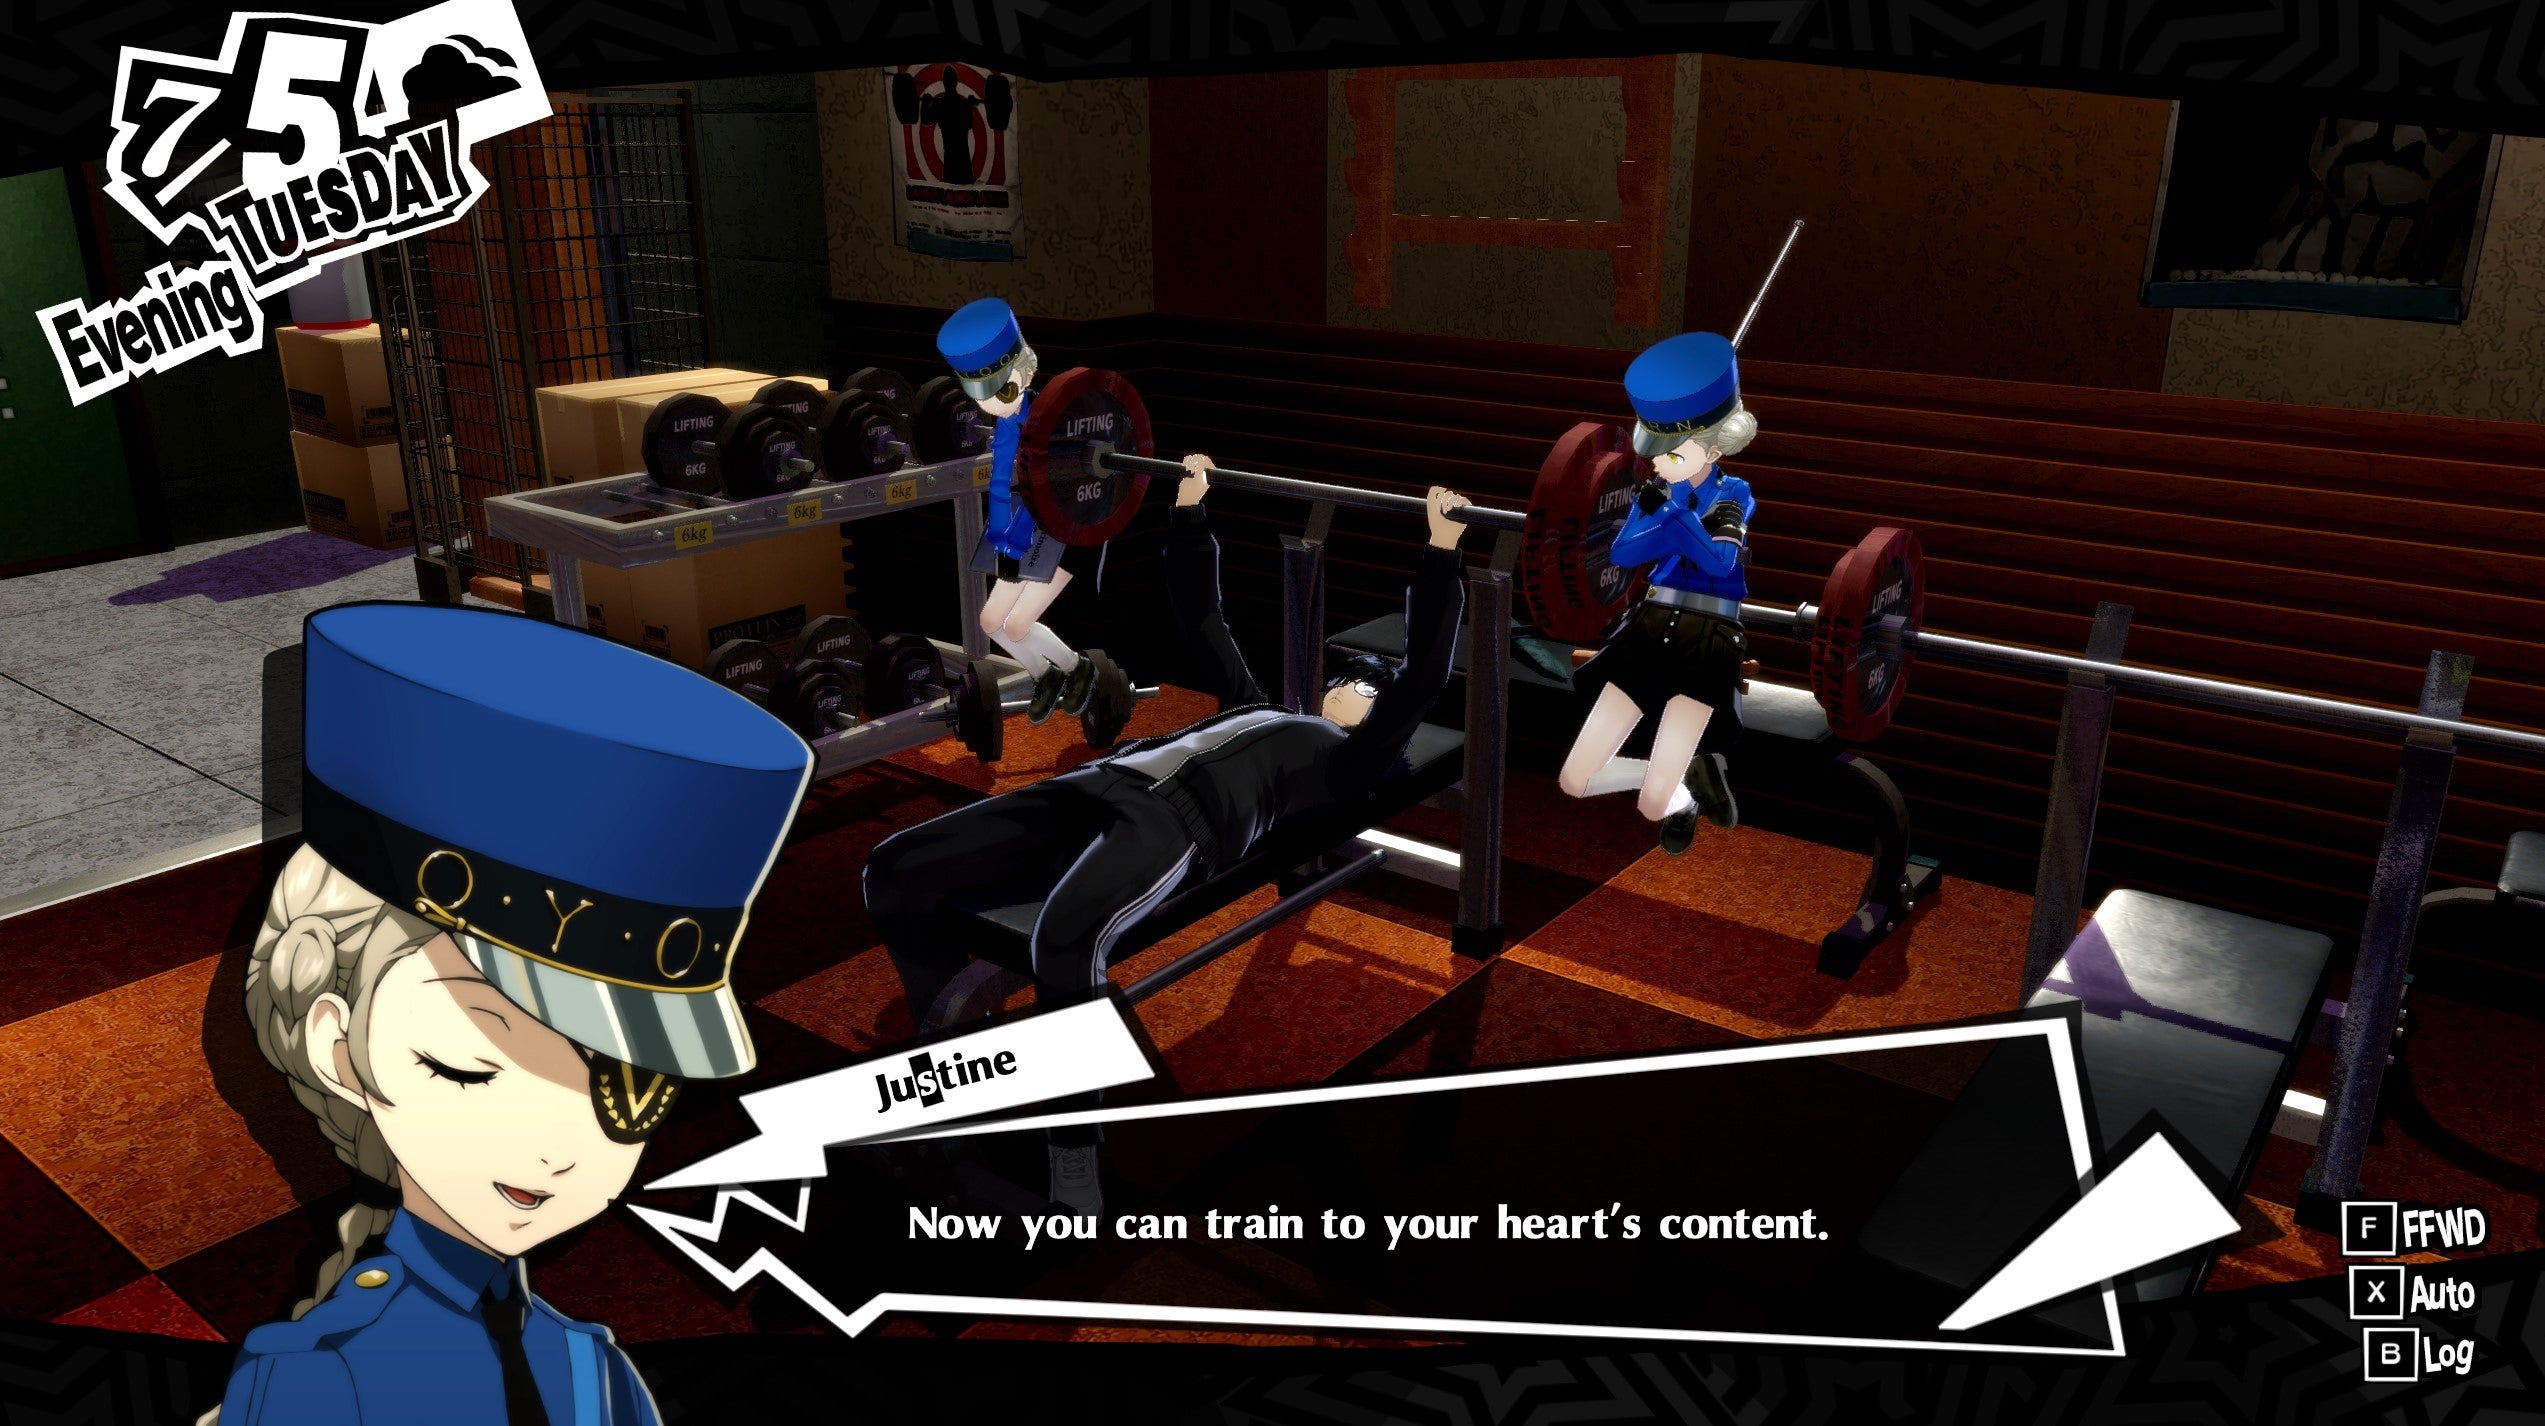 Hanging out with Justine and Caroline at the gym in Persona 5 Royal.